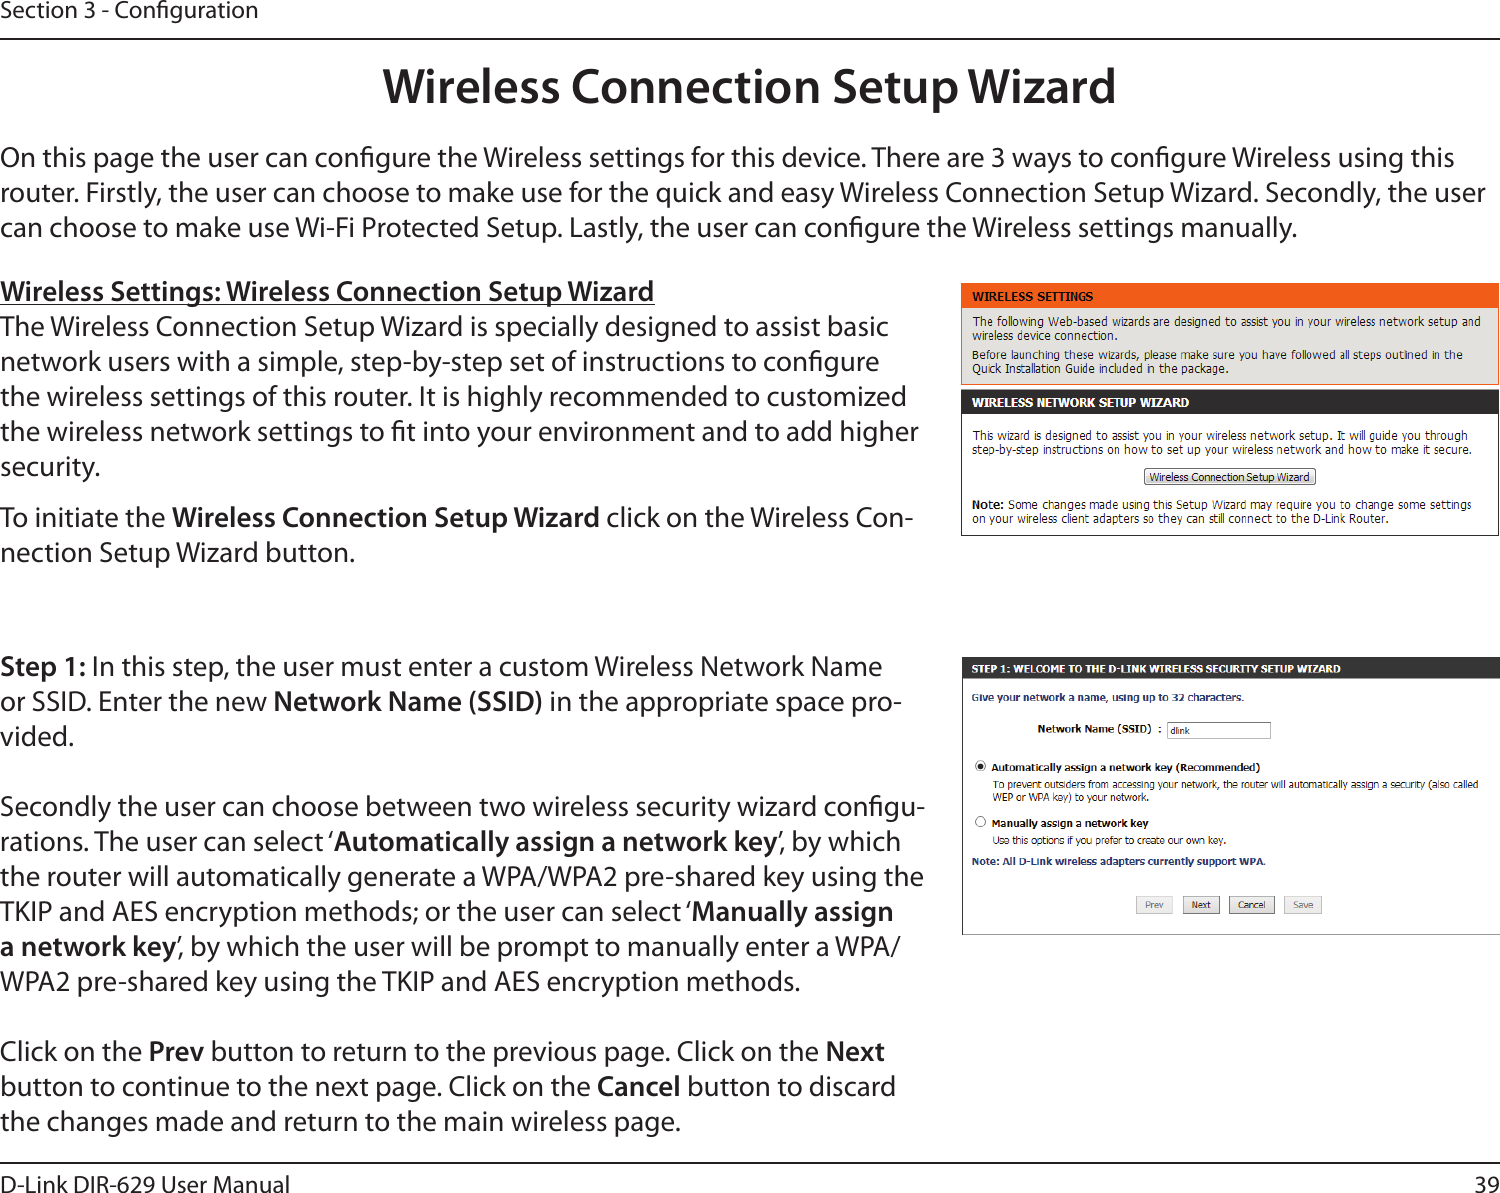 39D-Link DIR-629 User ManualSection 3 - CongurationOn this page the user can congure the Wireless settings for this device. There are 3 ways to congure Wireless using this can choose to make use Wi-Fi Protected Setup. Lastly, the user can congure the Wireless settings manually.Wireless Settings: Wireless Connection Setup WizardThe Wireless Connection Setup Wizard is specially designed to assist basic network users with a simple, step-by-step set of instructions to congure the wireless settings of this router. It is highly recommended to customized the wireless network settings to t into your environment and to add higher security.Step 1: In this step, the user must enter a custom Wireless Network Name or SSID. Enter the new Network Name (SSID) in the appropriate space pro-vided.Secondly the user can choose between two wireless security wizard congu-rations. The user can select ‘Automatically assign a network key’, by which the router will automatically generate a WPA/WPA2 pre-shared key using the TKIP and AES encryption methods; or the user can select ‘Manually assign a network key’, by which the user will be prompt to manually enter a WPA/WPA2 pre-shared key using the TKIP and AES encryption methods.Click on the Prev button to return to the previous page. Click on the Next button to continue to the next page. Click on the Cancel button to discard the changes made and return to the main wireless page.To initiate the Wireless Connection Setup Wizard click on the Wireless Con-nection Setup Wizard button.Wireless Connection Setup Wizard